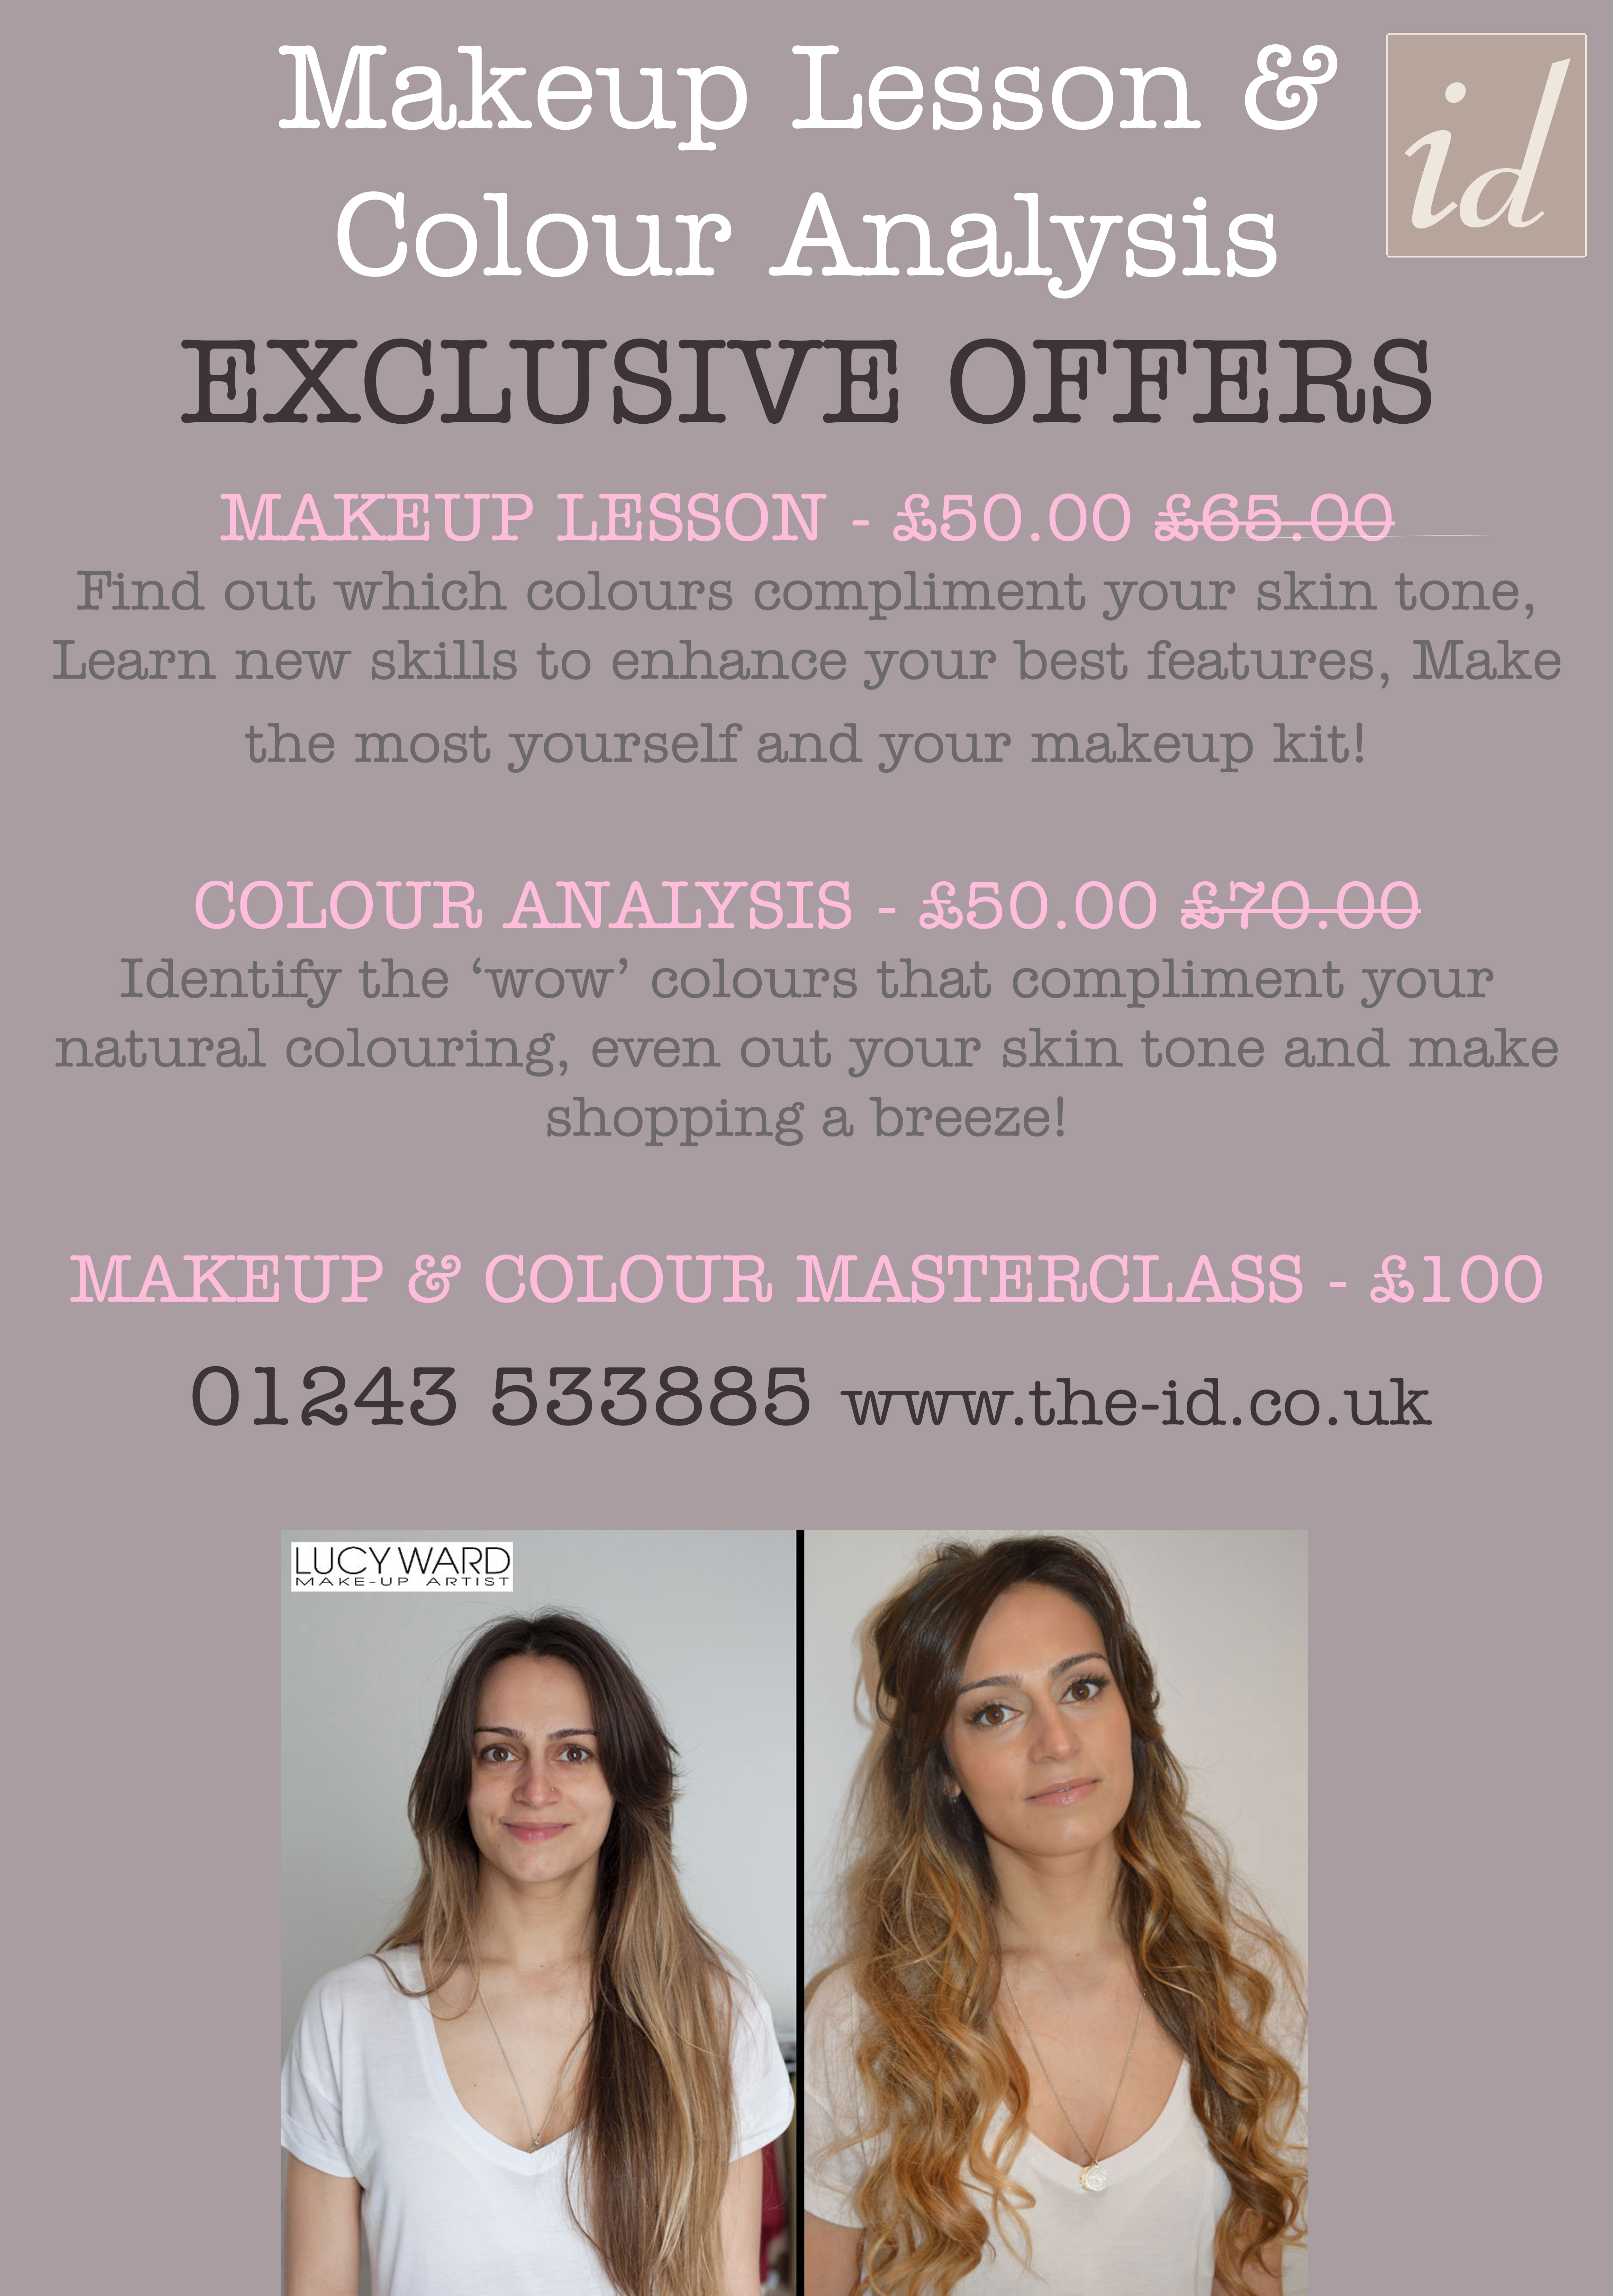 Makeup Lesson & Colour Analysis Offers at ID Makeup, Hair & Beauty Lounge  Chichester | ID Makeup, Hair & Beauty Lounge